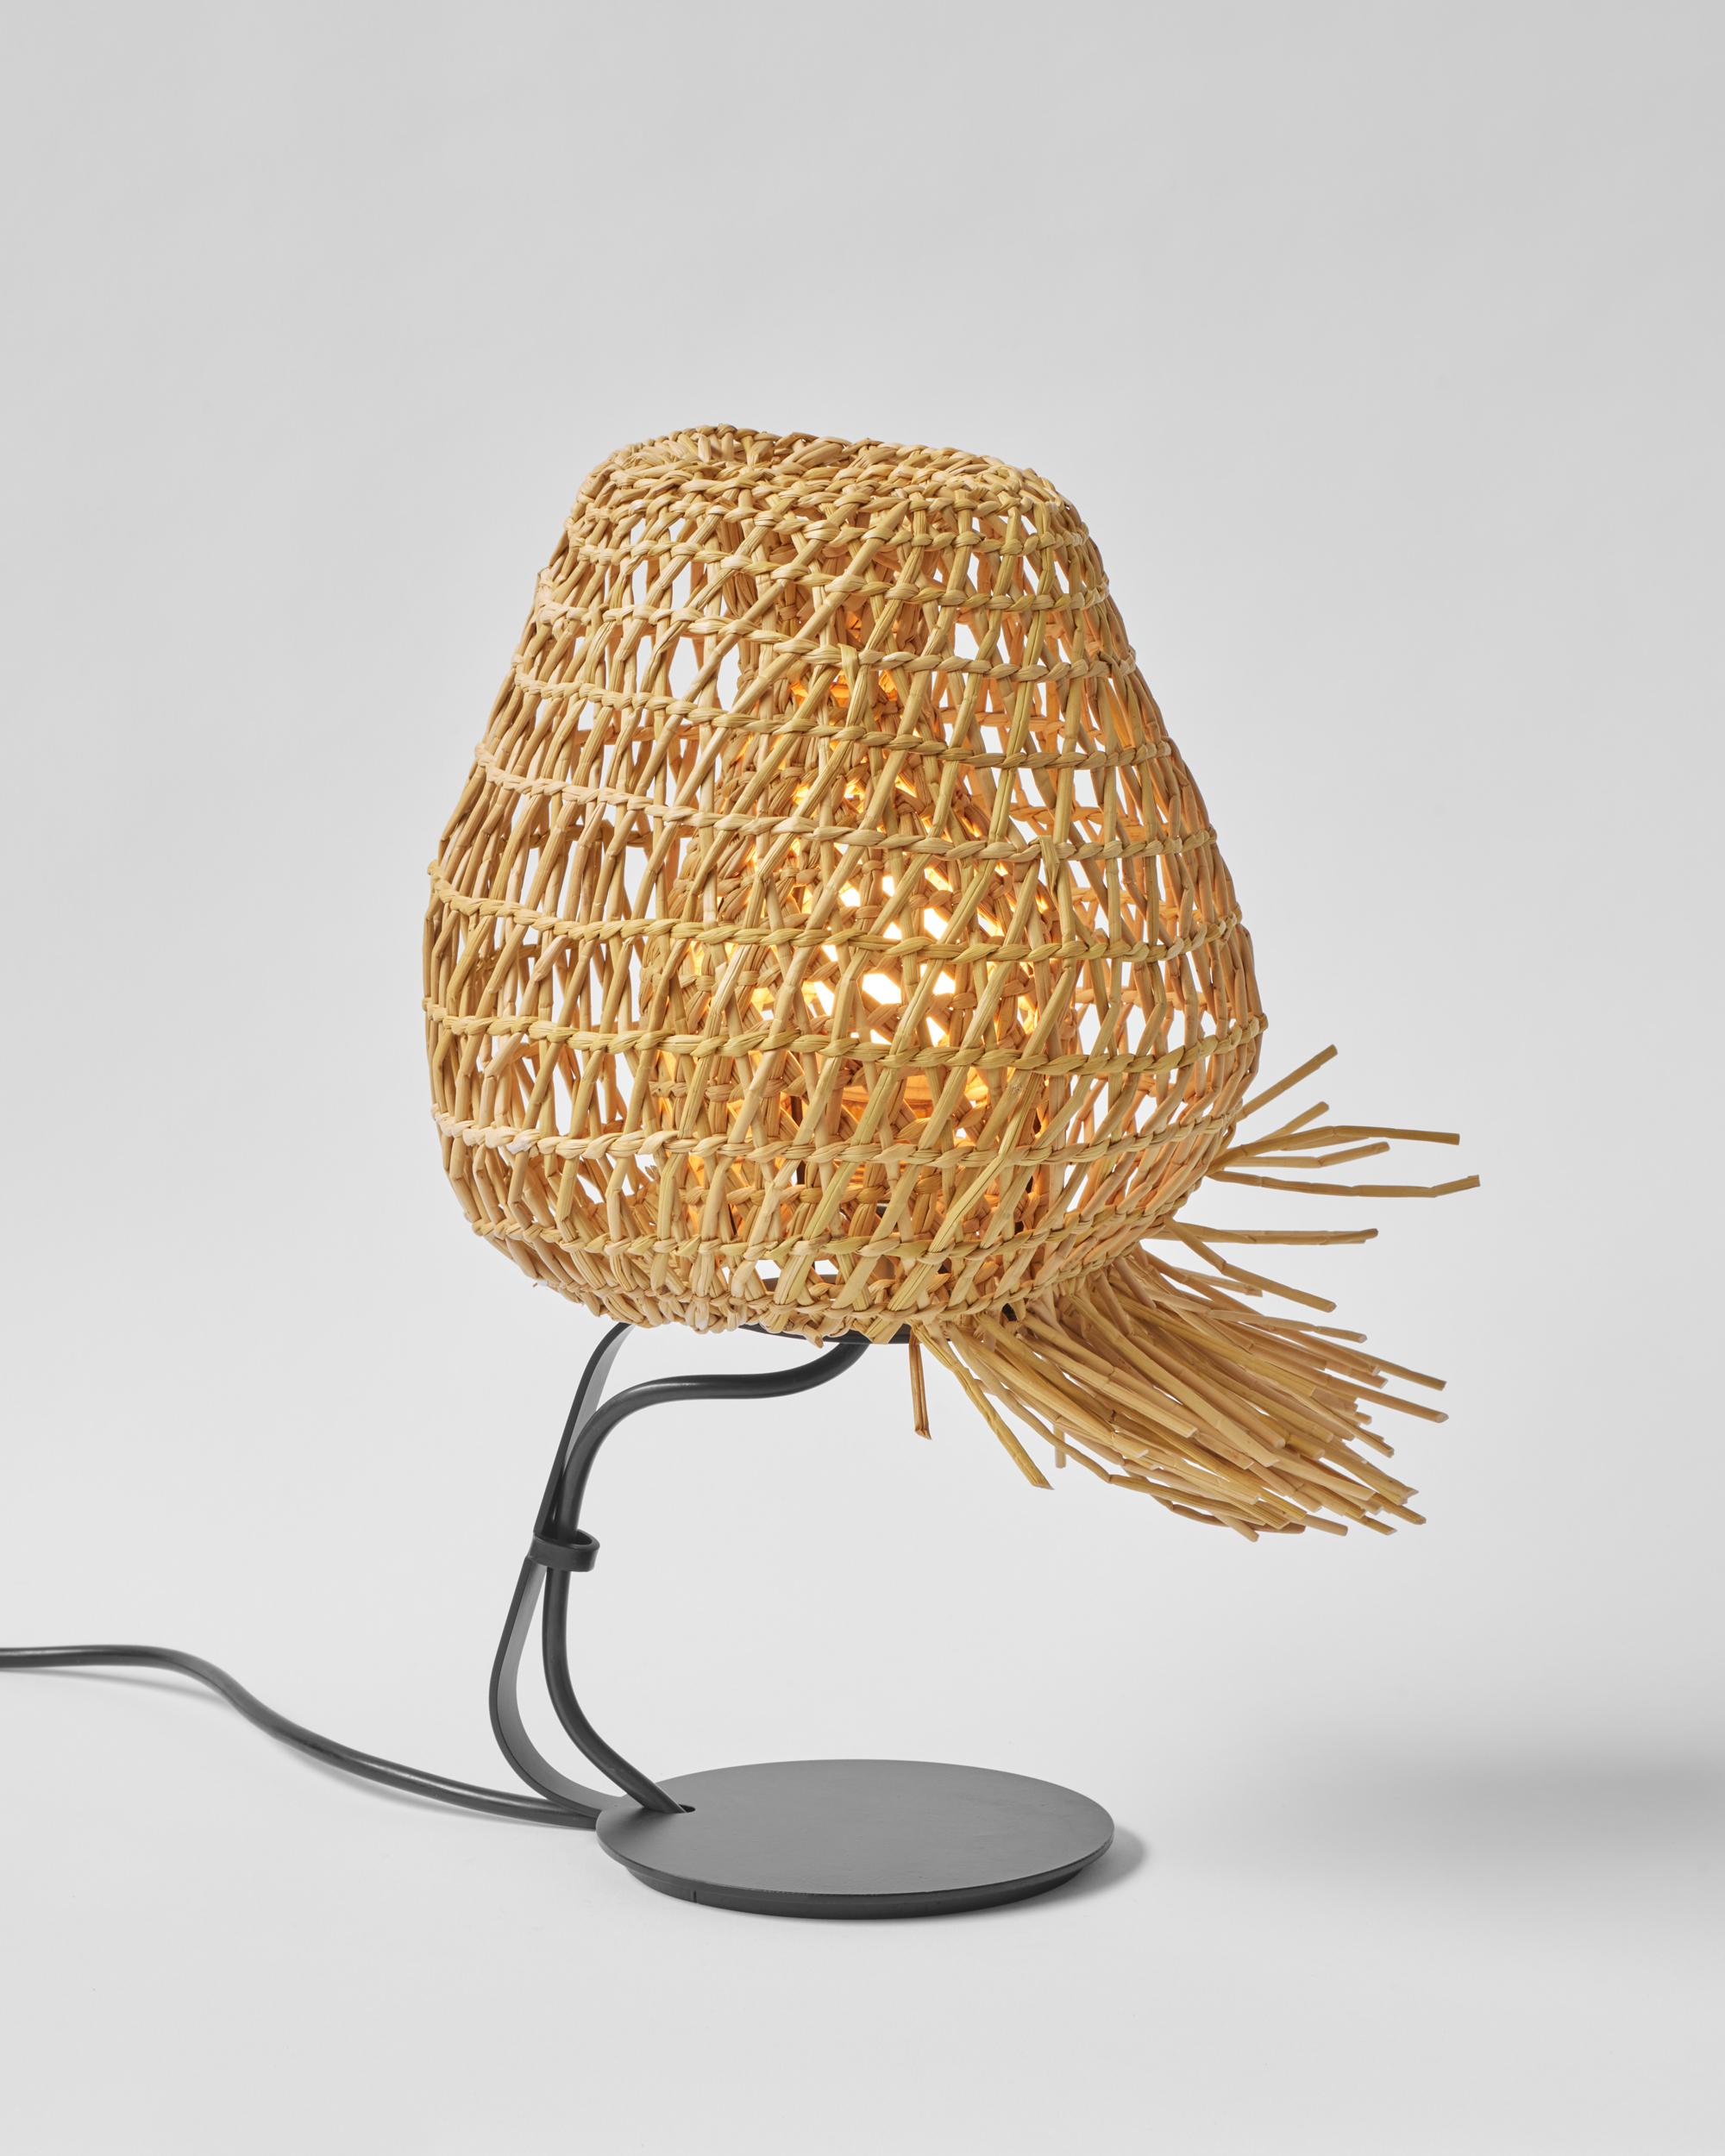 Vegetable Fabrics N°6 Nest lamp by Estudio Rafael Freyre
Dimensions: D 30 x H 40 cm 
Materials: Reed, metal.

Vegetable Fabrics brings us closer to the processes of growth and transformation of the plant organism, posing a relationship with them